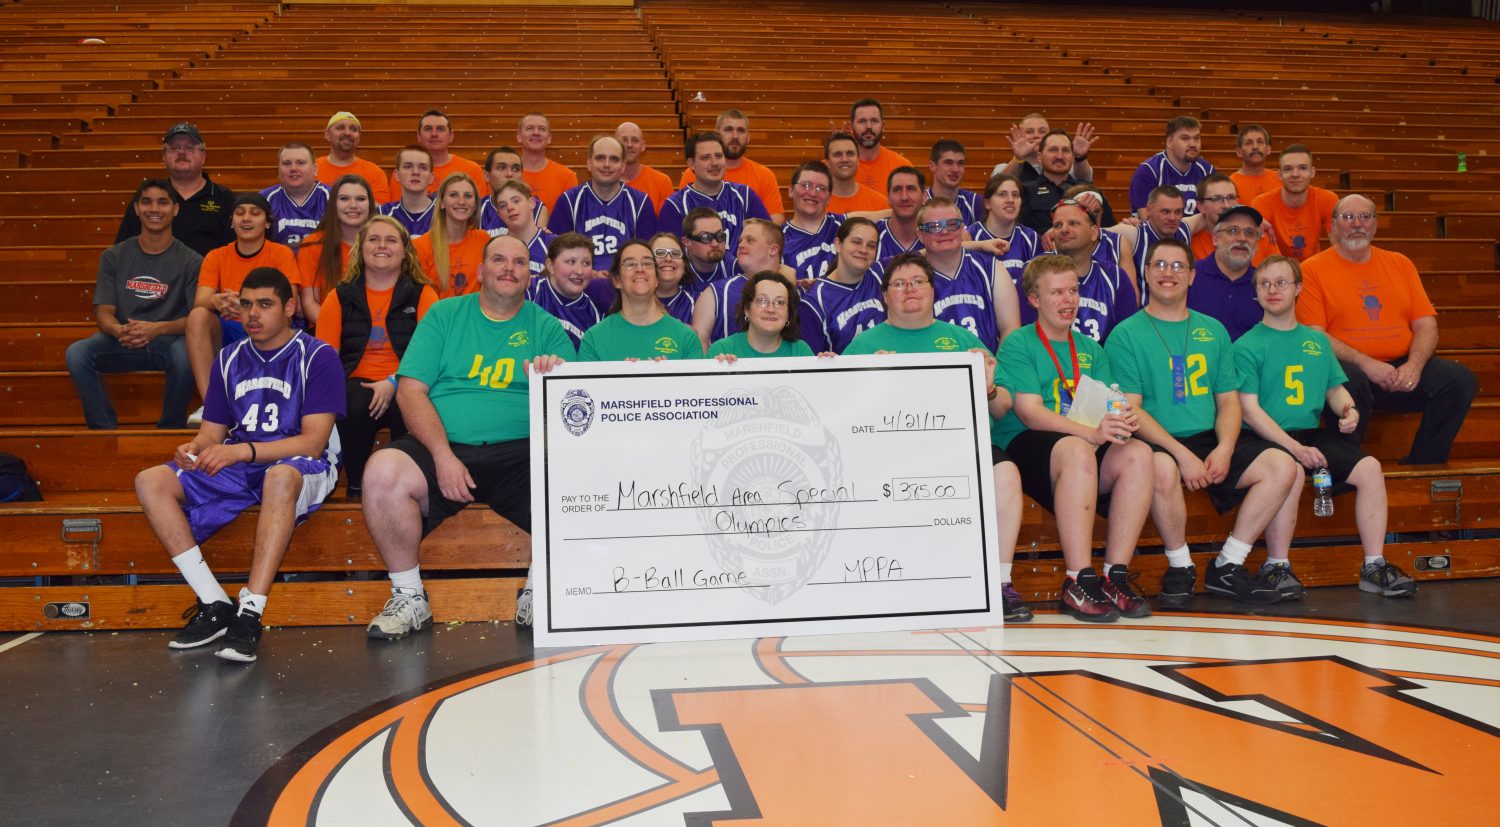 Members of the Marshfield Police Department and Marshfield Area Special Olympics present a check for event proceeds from a charity basketball game on April 21.